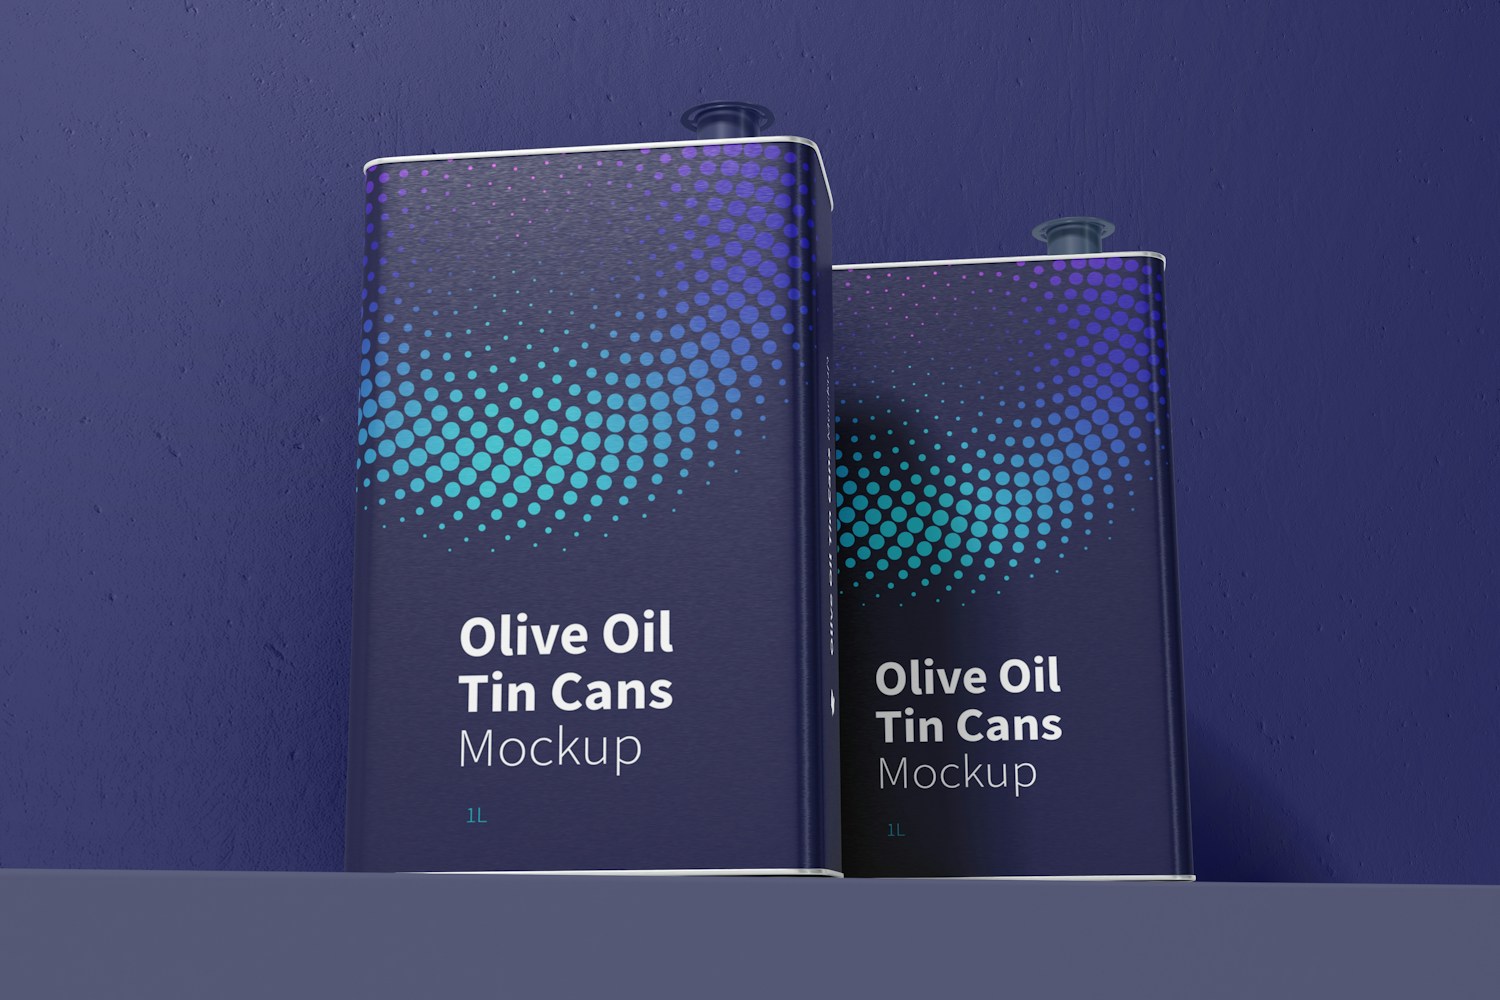 1 Liter Olive Oil Rectangular Tin Cans Mockup, Front View